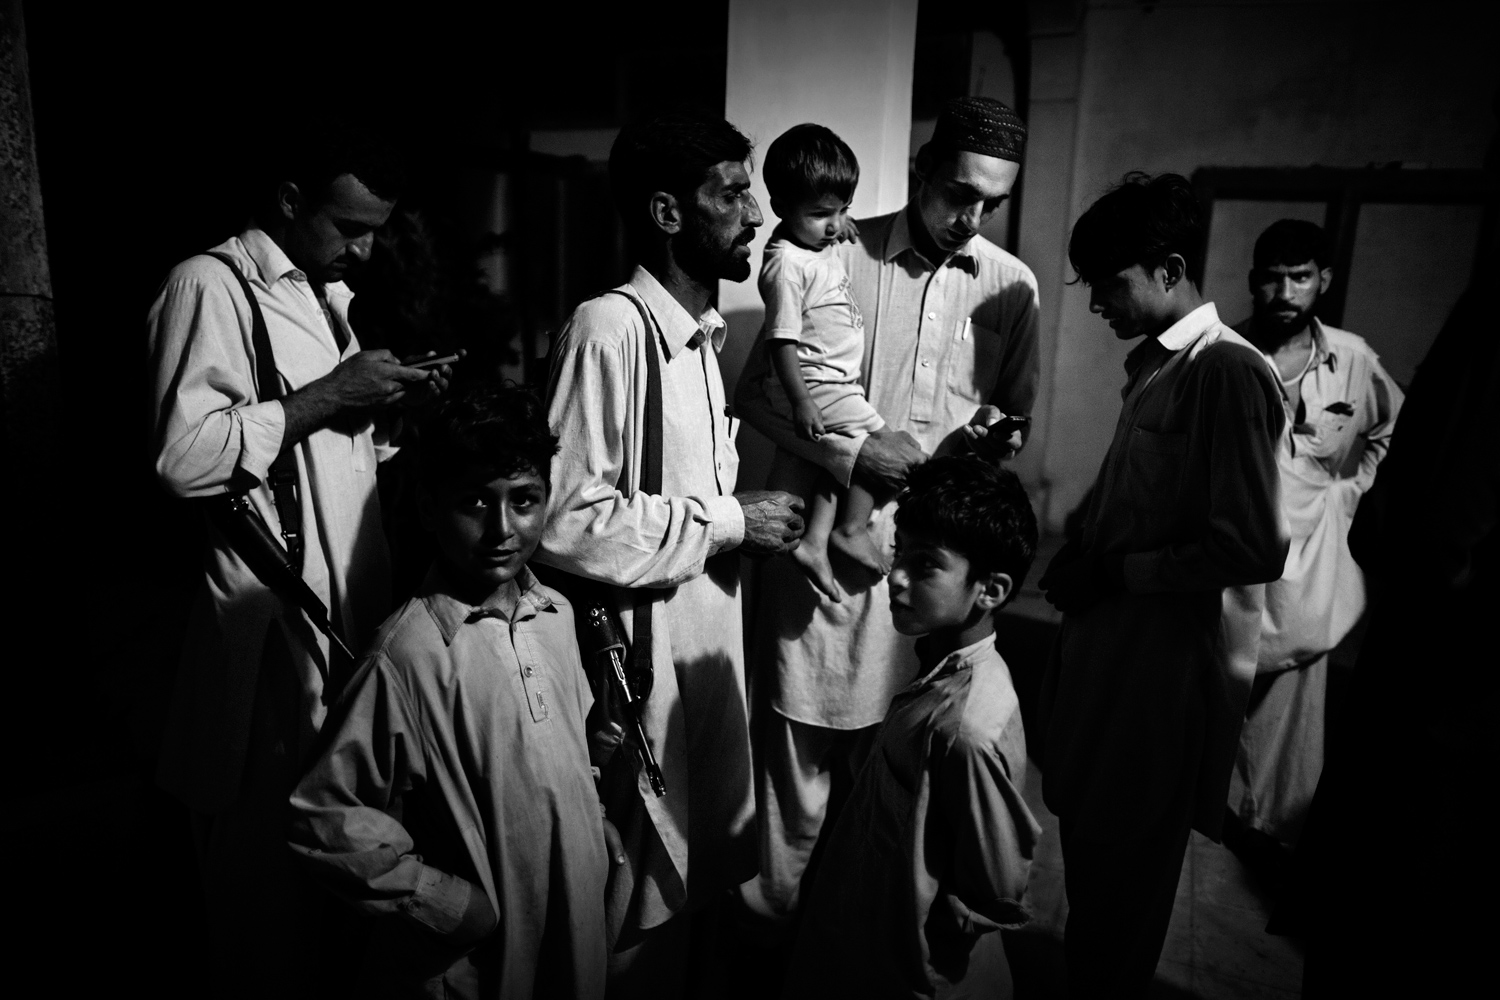 Pakistan, Swat Valley, Thal, November 2010. Lashkar members before leaving for pehra, the night patrol around the streets of their village. The operation goes on till 5 a.m., and can involve, as in this case, even the youngest members.